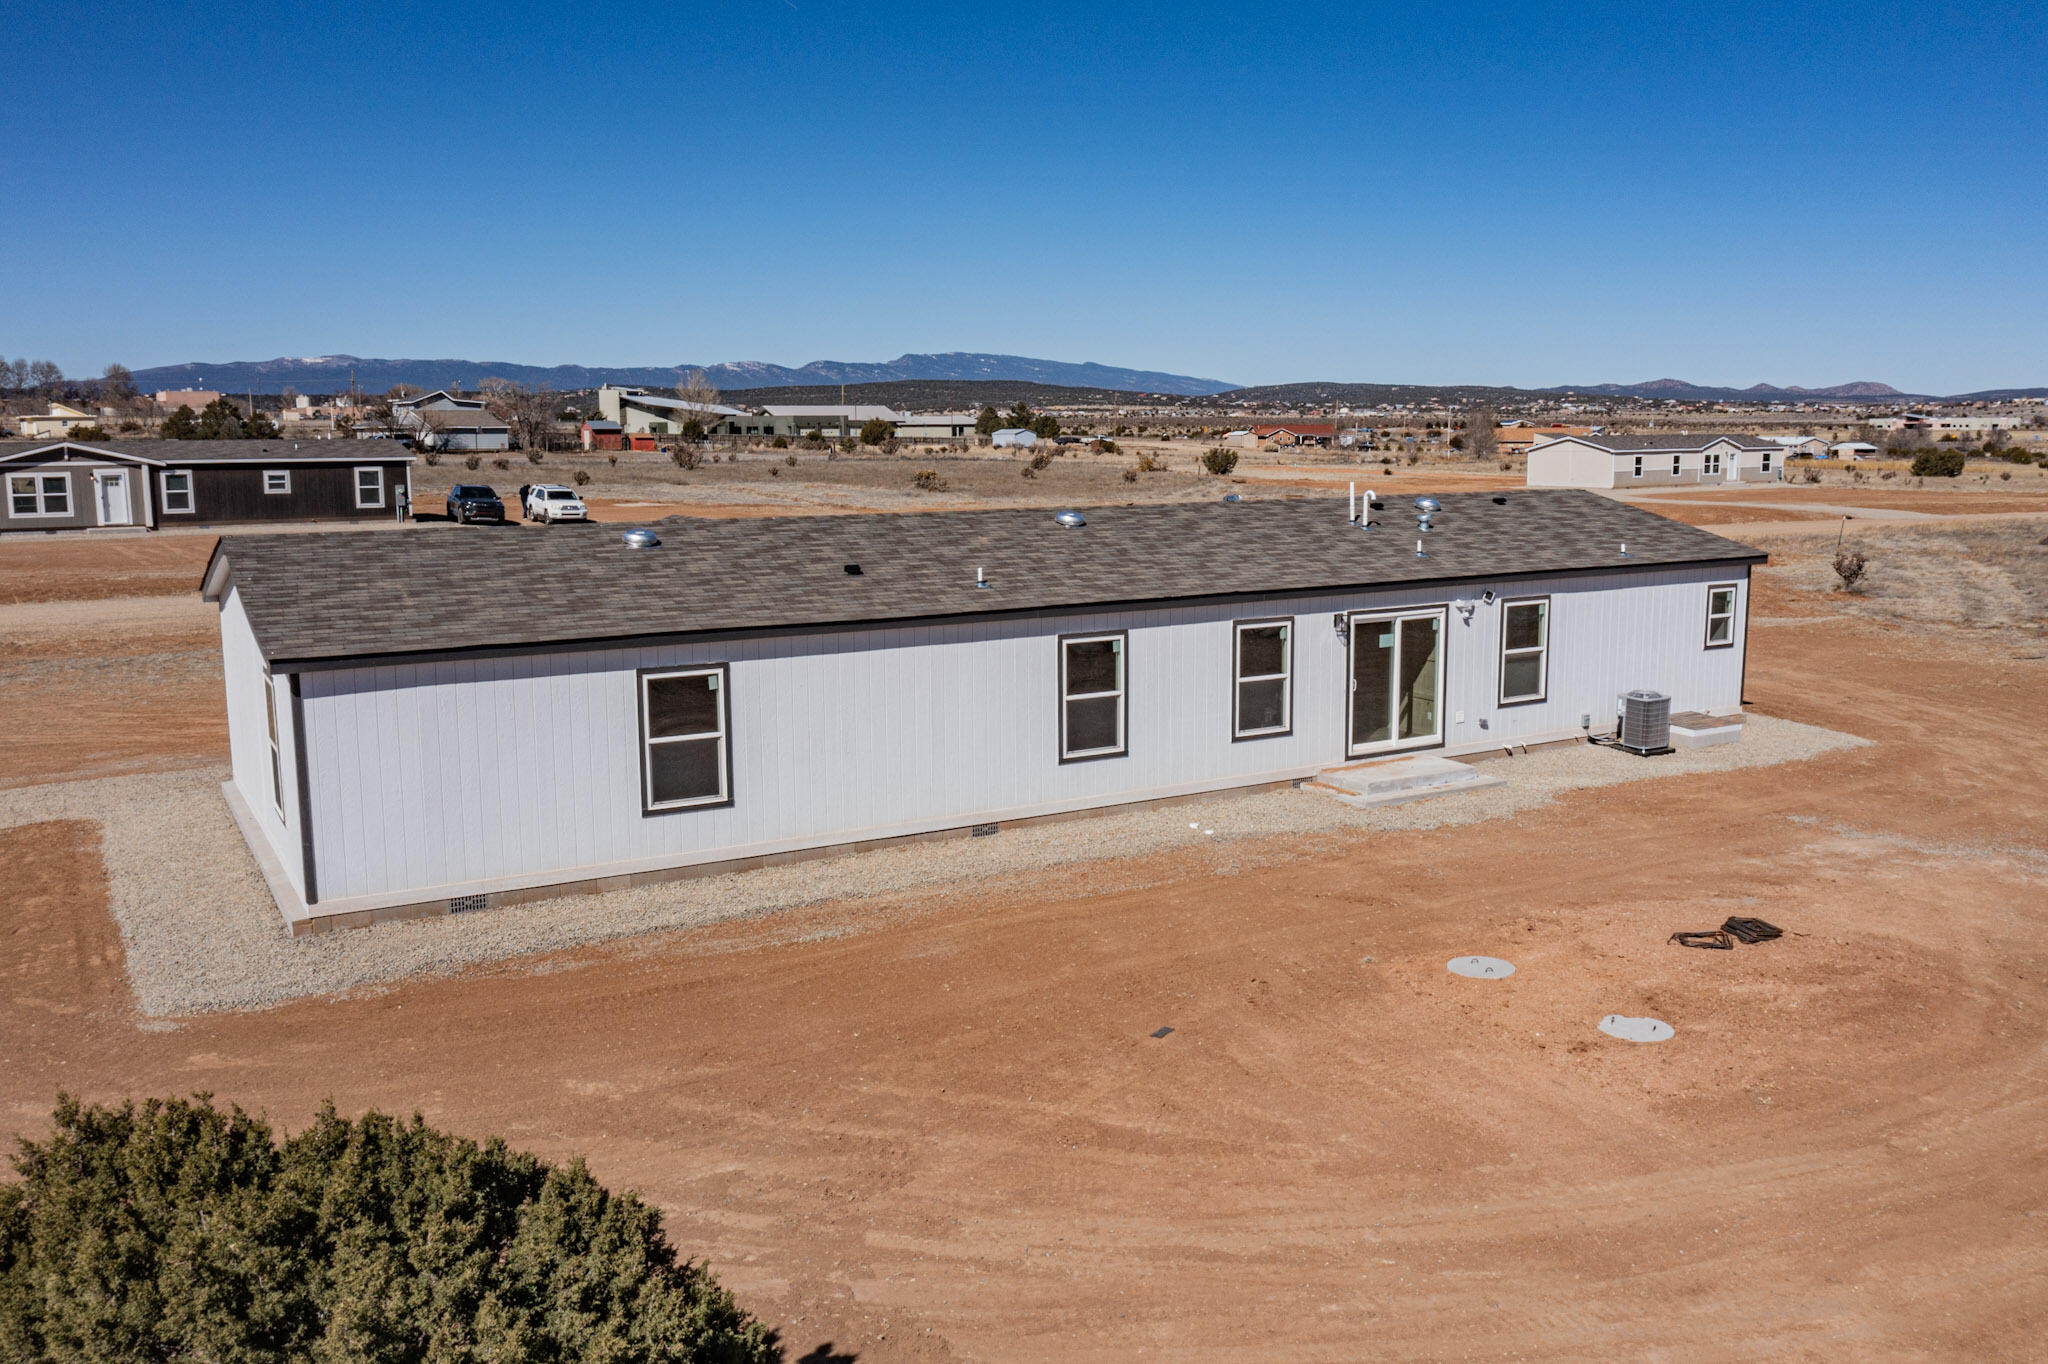 4 Corte Agave, Edgewood, New Mexico 87015, 5 Bedrooms Bedrooms, ,3 BathroomsBathrooms,Residential,For Sale,4 Corte Agave,1060293